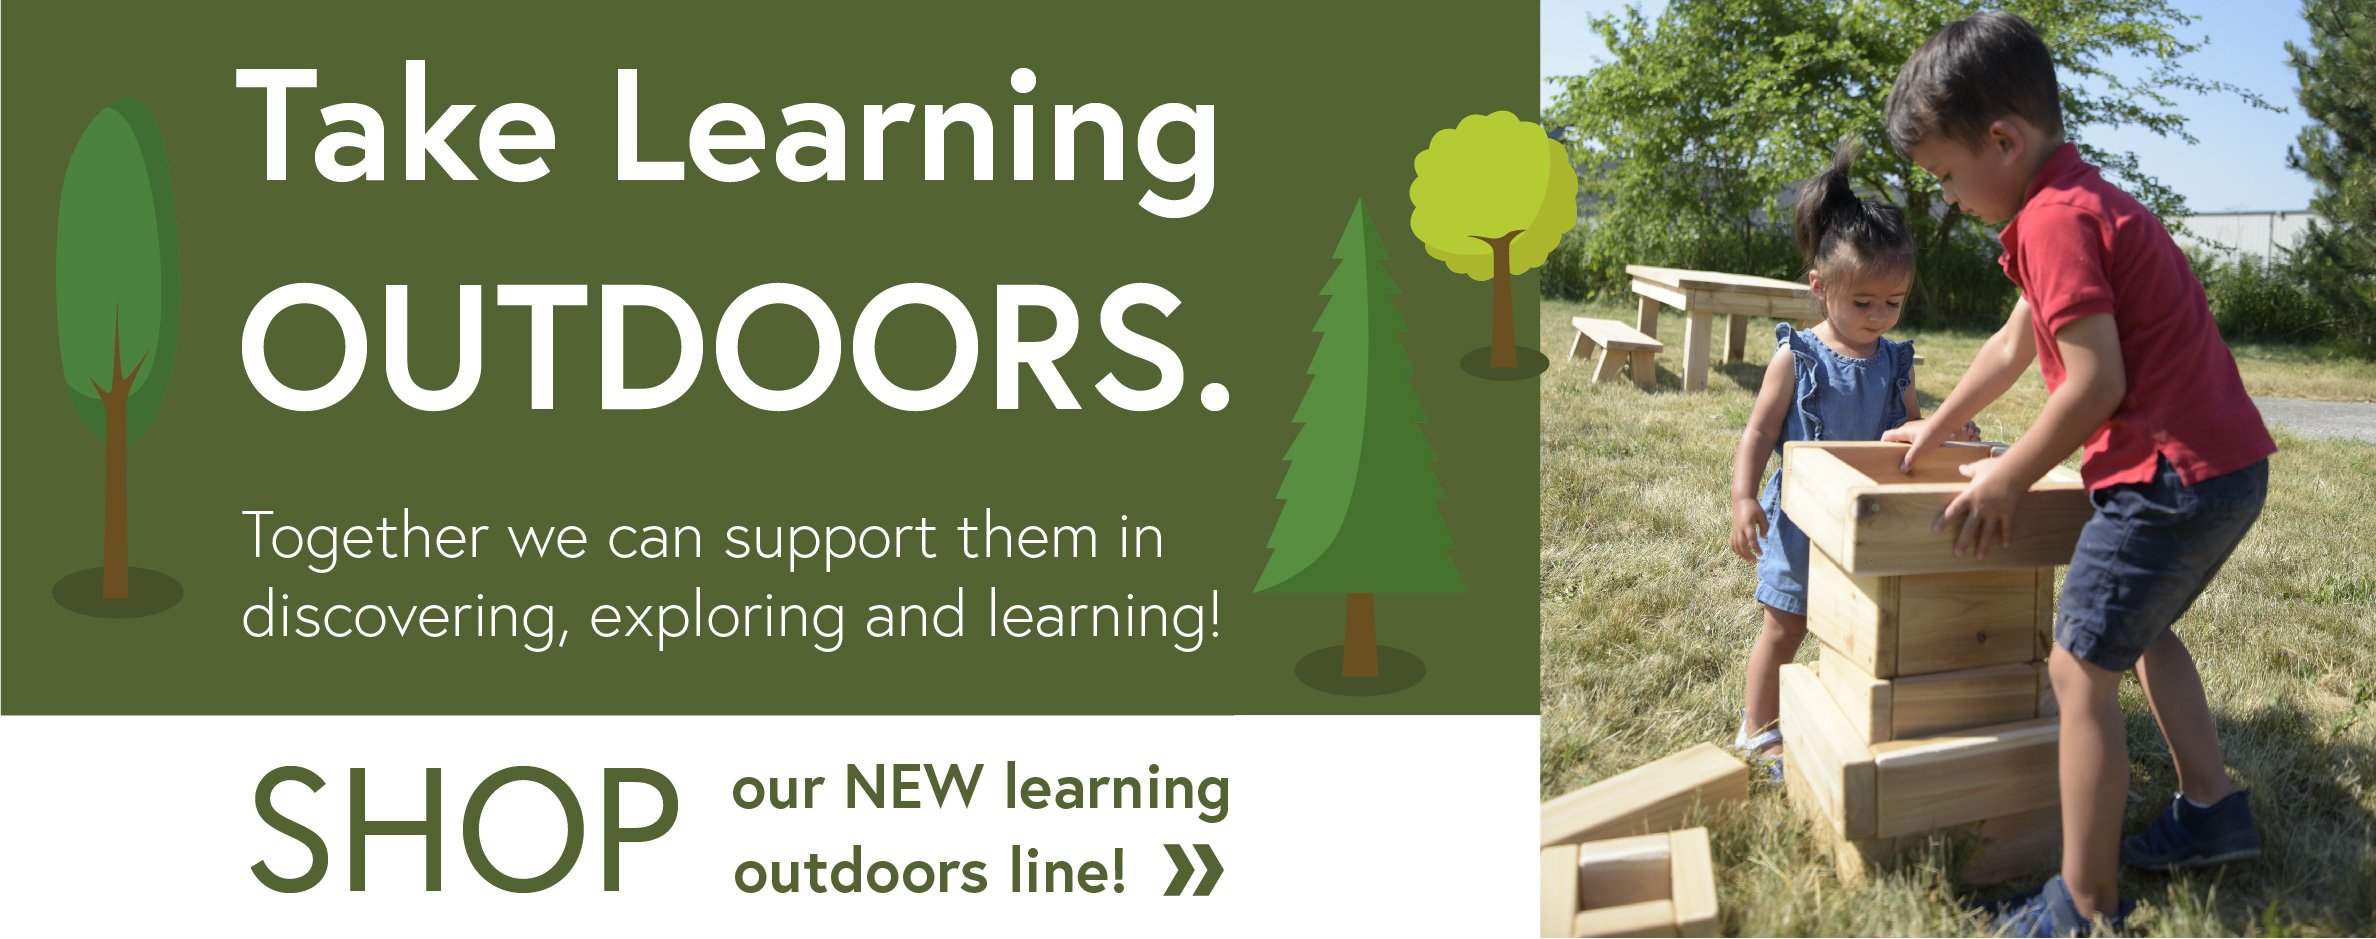 outdoor-learning-web-banner-new-03